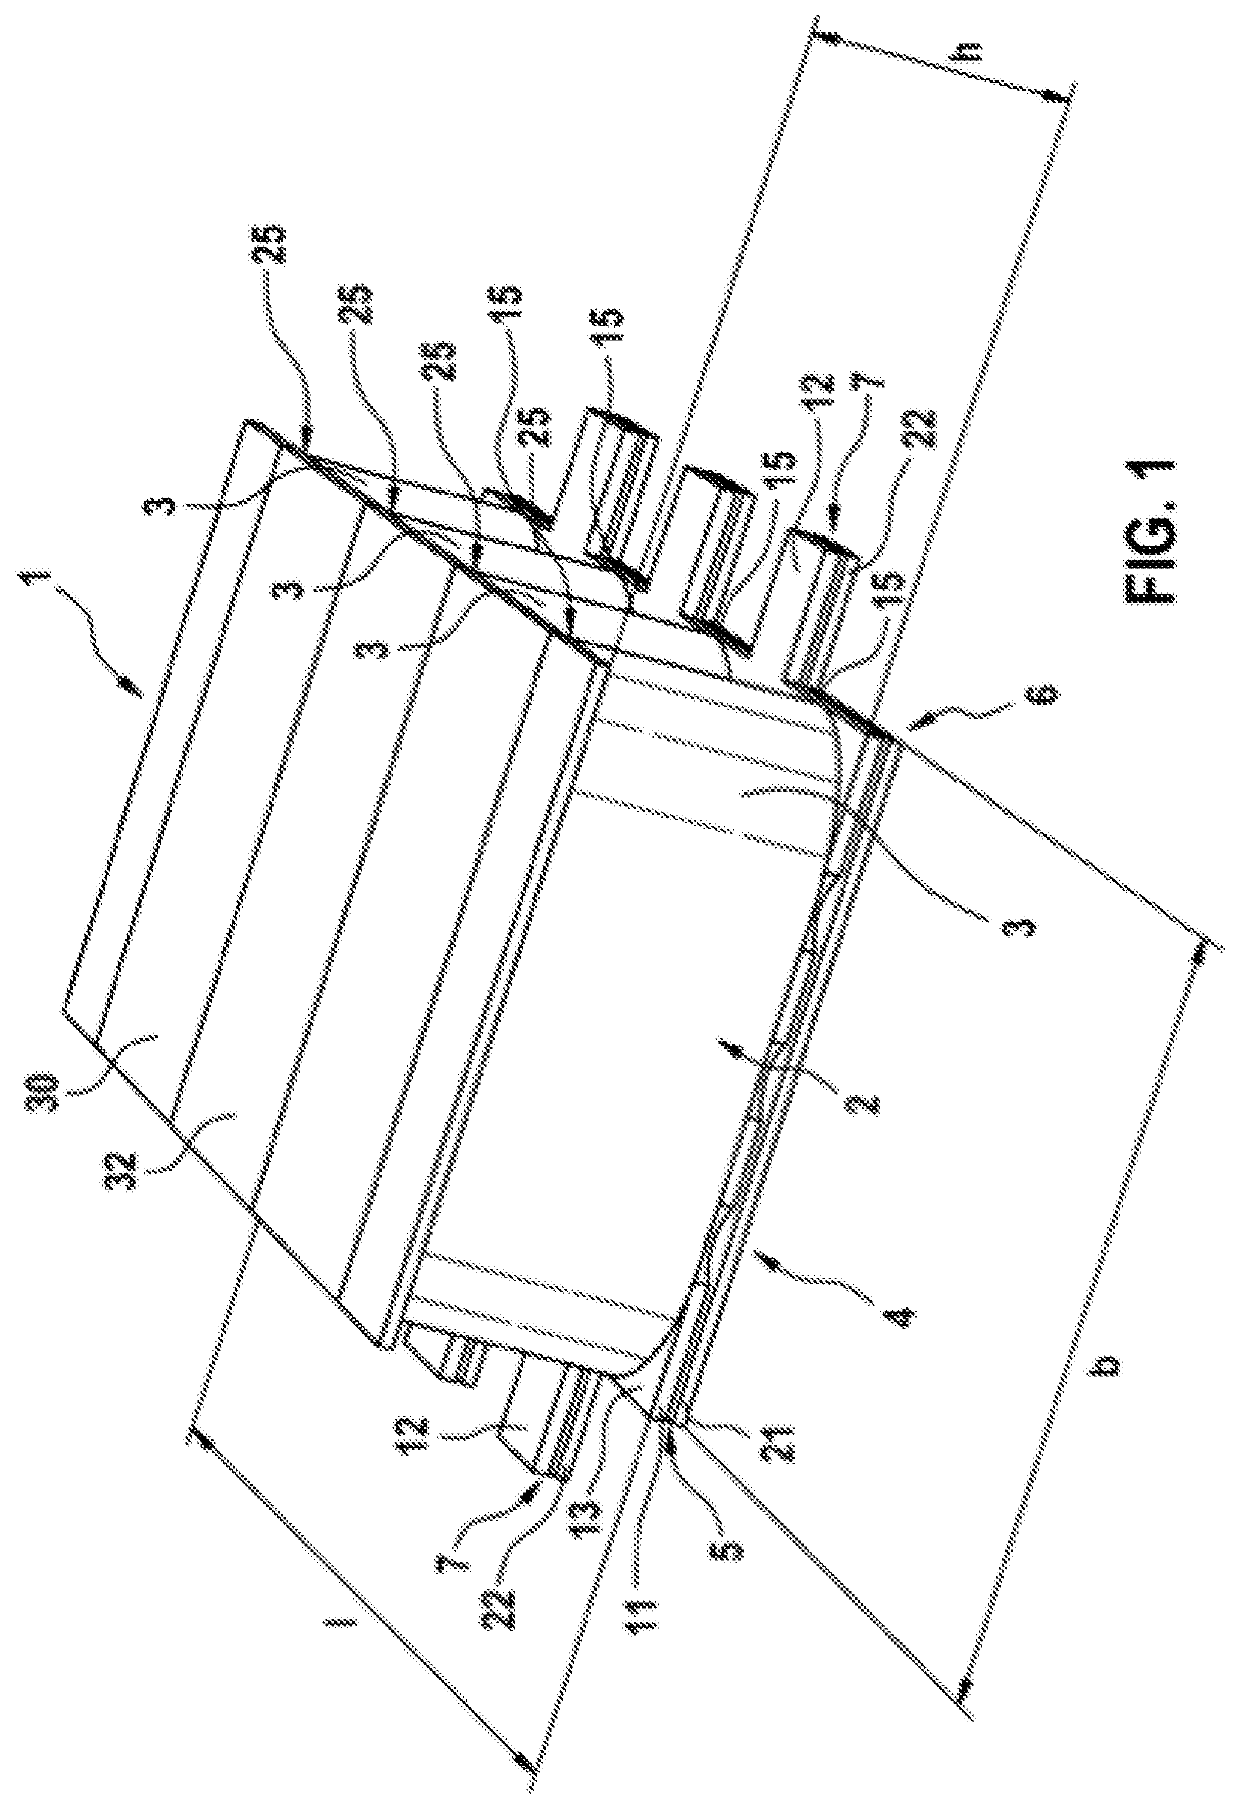 Capacitor, particularly intermediate circuit capacitor for a multiphase system